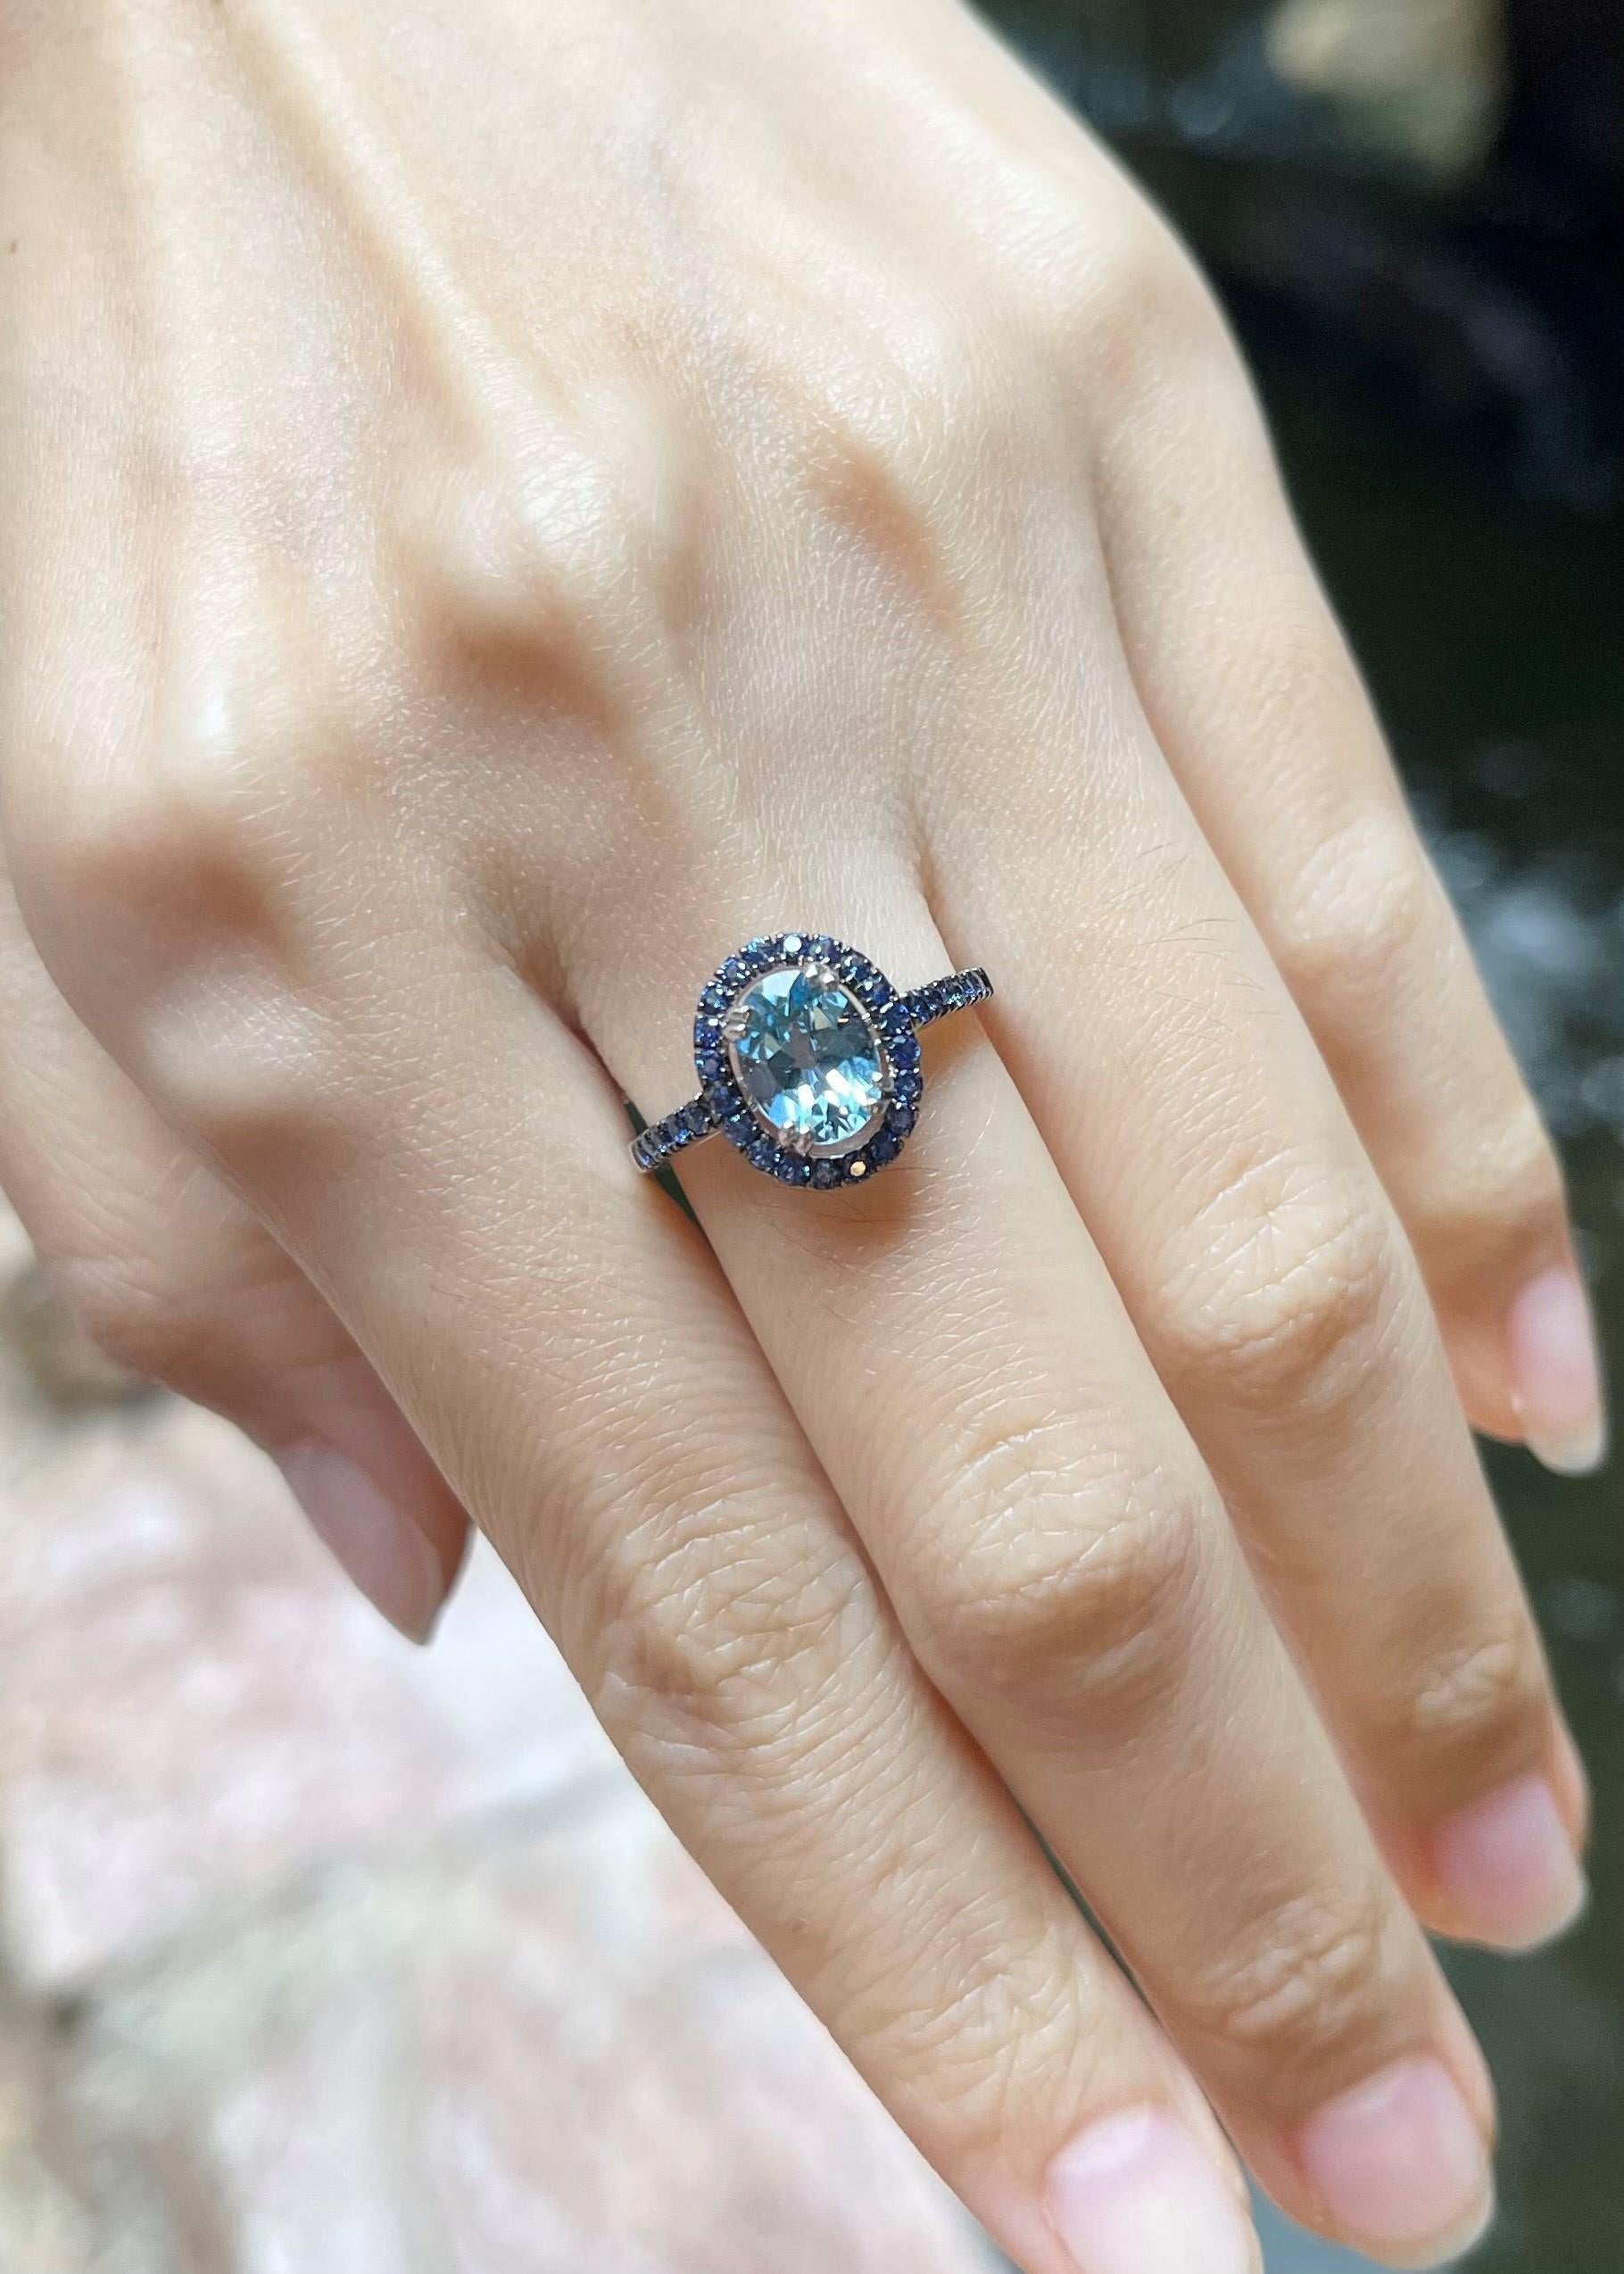 Aquamarine 0.98 carat with Blue Sapphire 0.26 carat Ring set in 18K White Gold Settings

Width:  1.0 cm 
Length: 1.3 cm
Ring Size: 53
Total Weight: 3.49 grams

